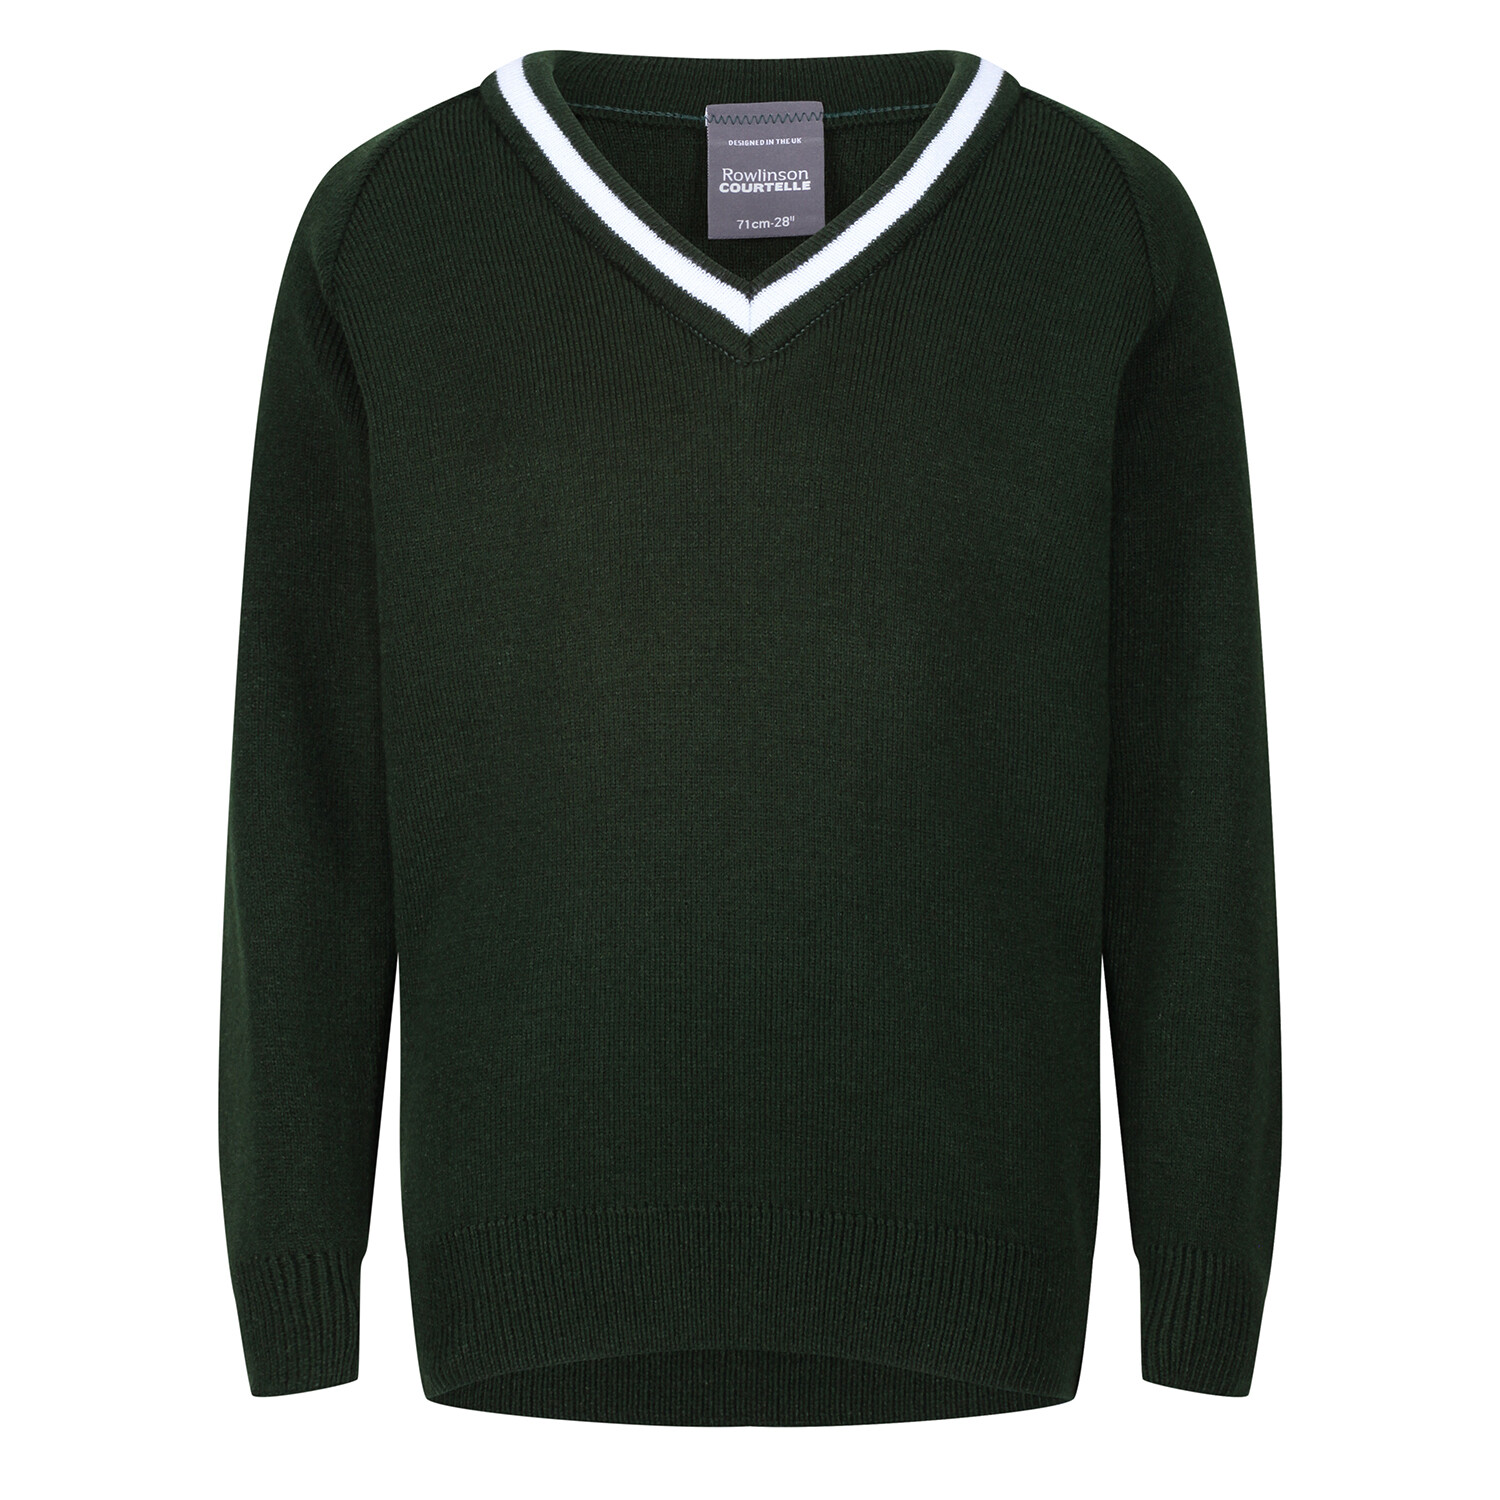 Cedars School Knitted V-neck with stripe